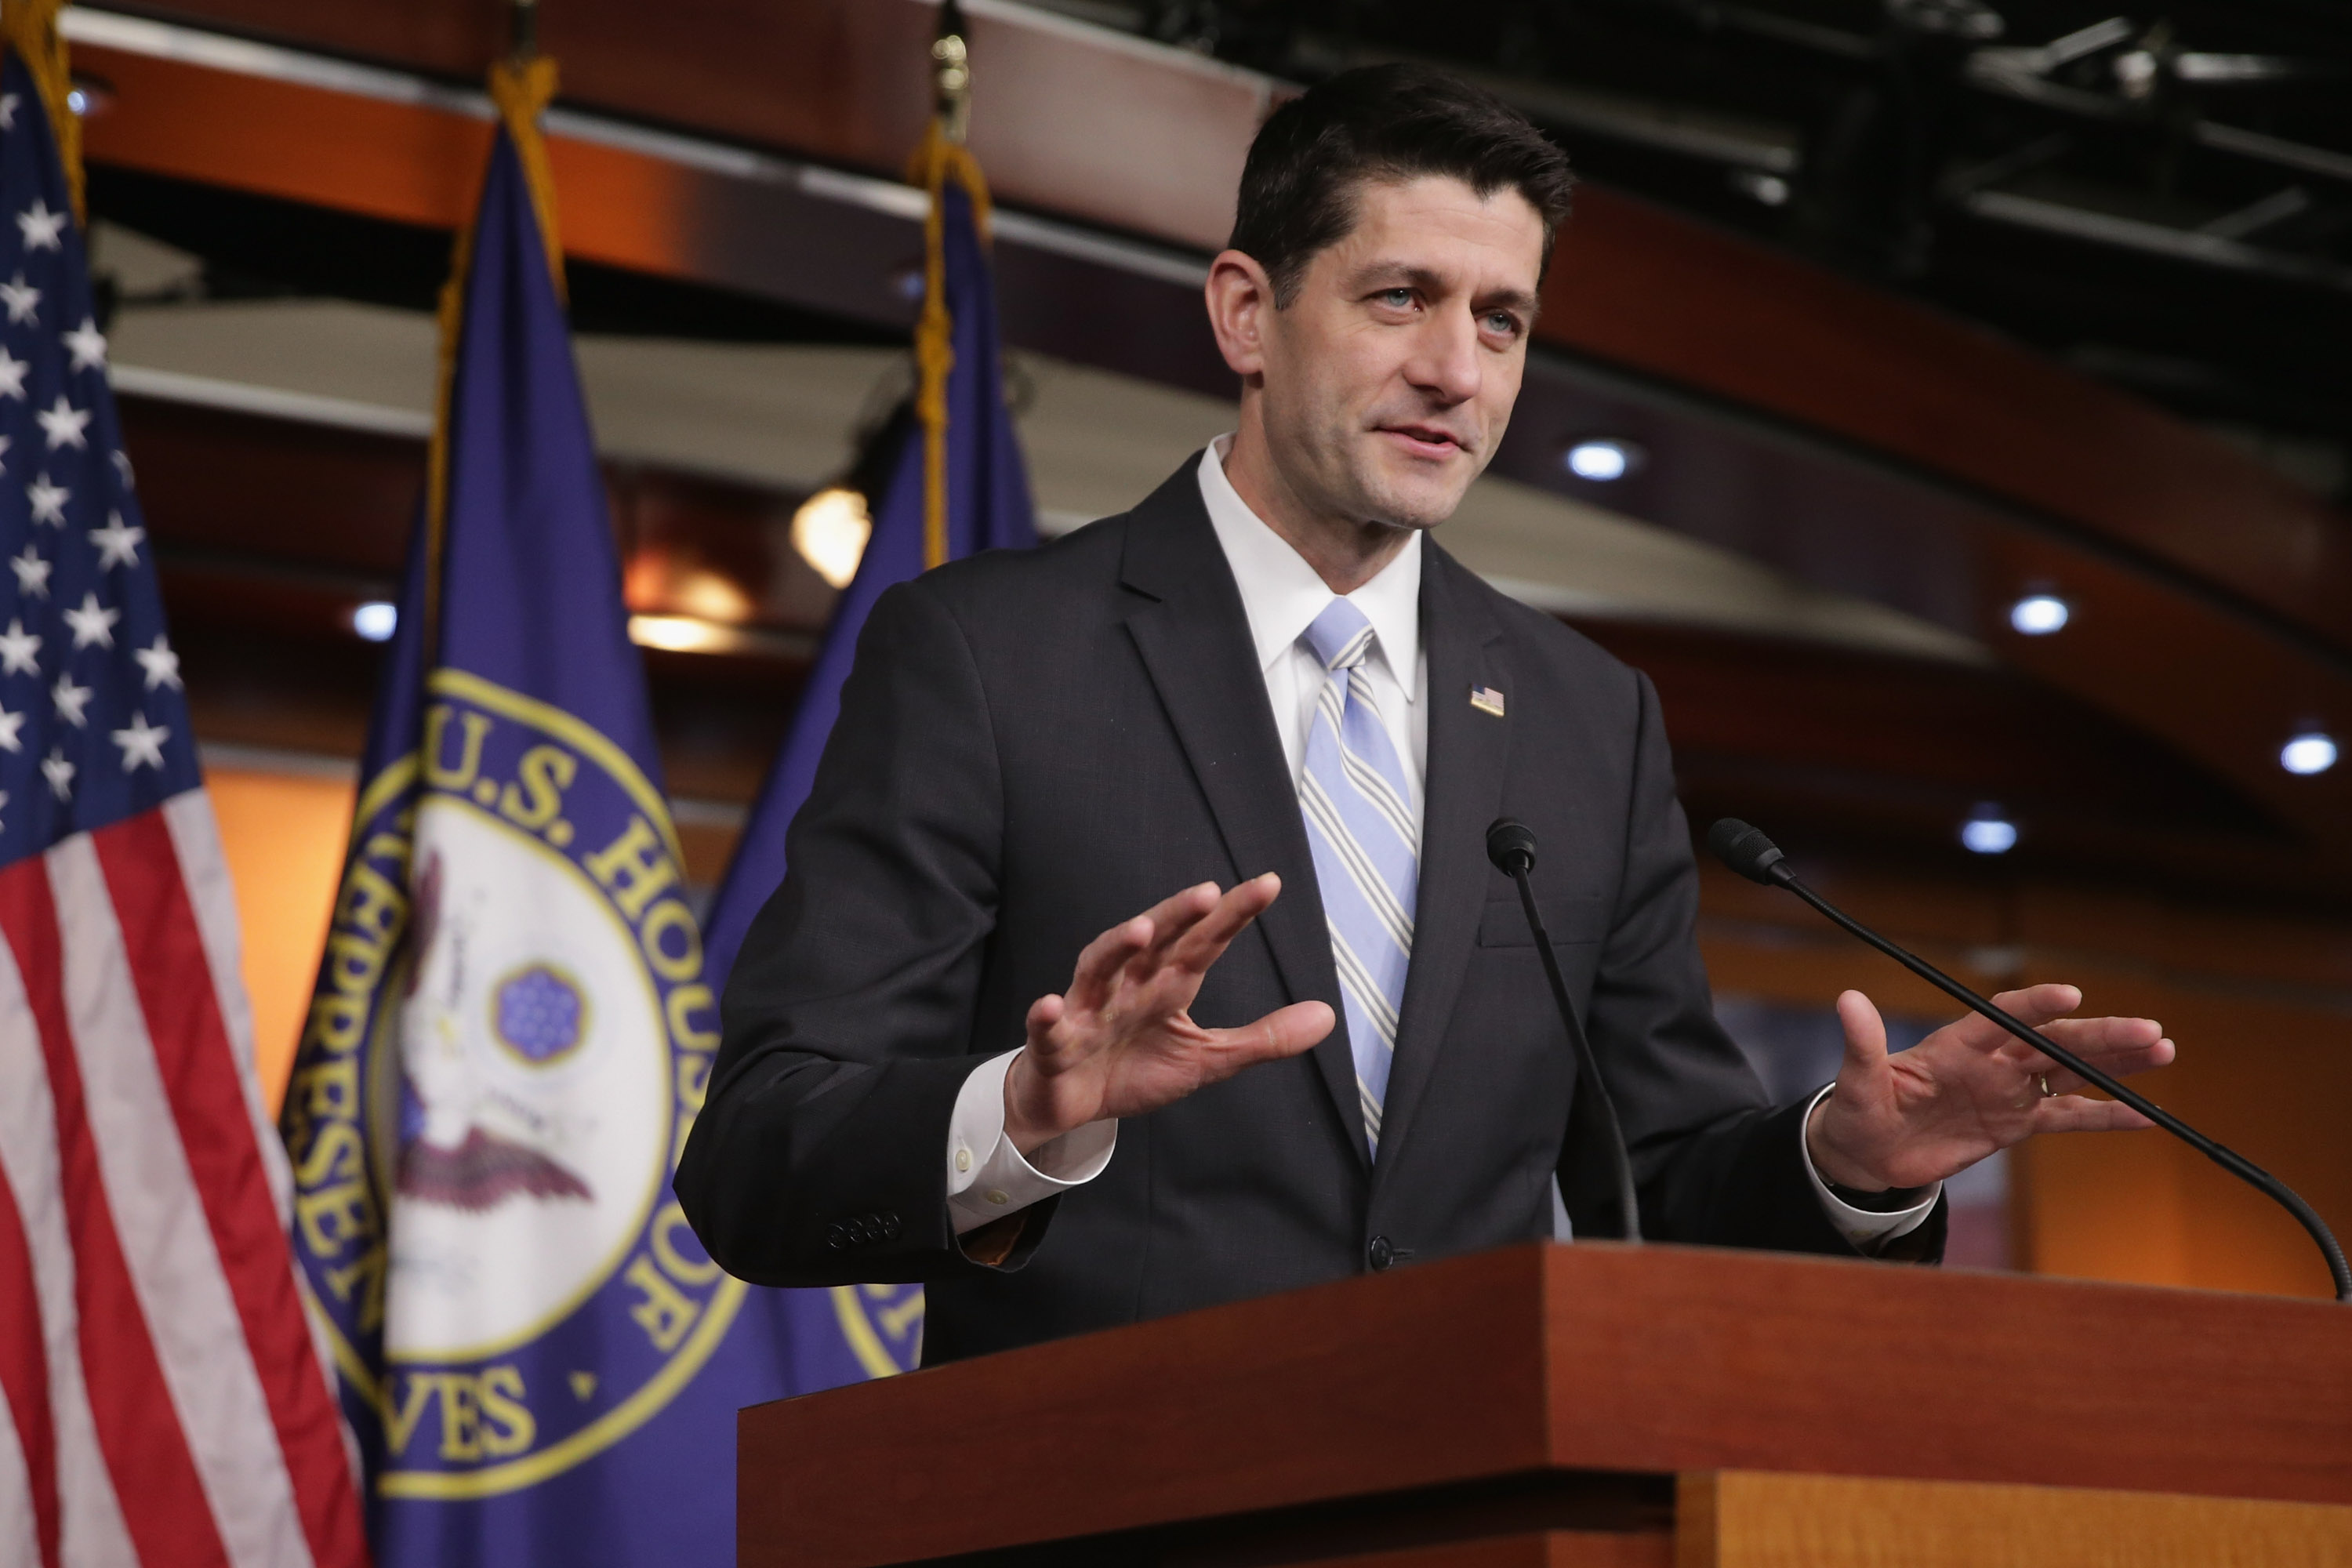 Speaker of the House Paul Ryan holds his weekly news conference at the U.S. Capitol January 7, 2016 in Washington, DC. Calling 2016 a "year of ideas," Ryan said that the House of Representatives will thing big but may not accomplish its key agenda with President Barack Obama in the White House. (Chip Somodevilla—Getty Images)